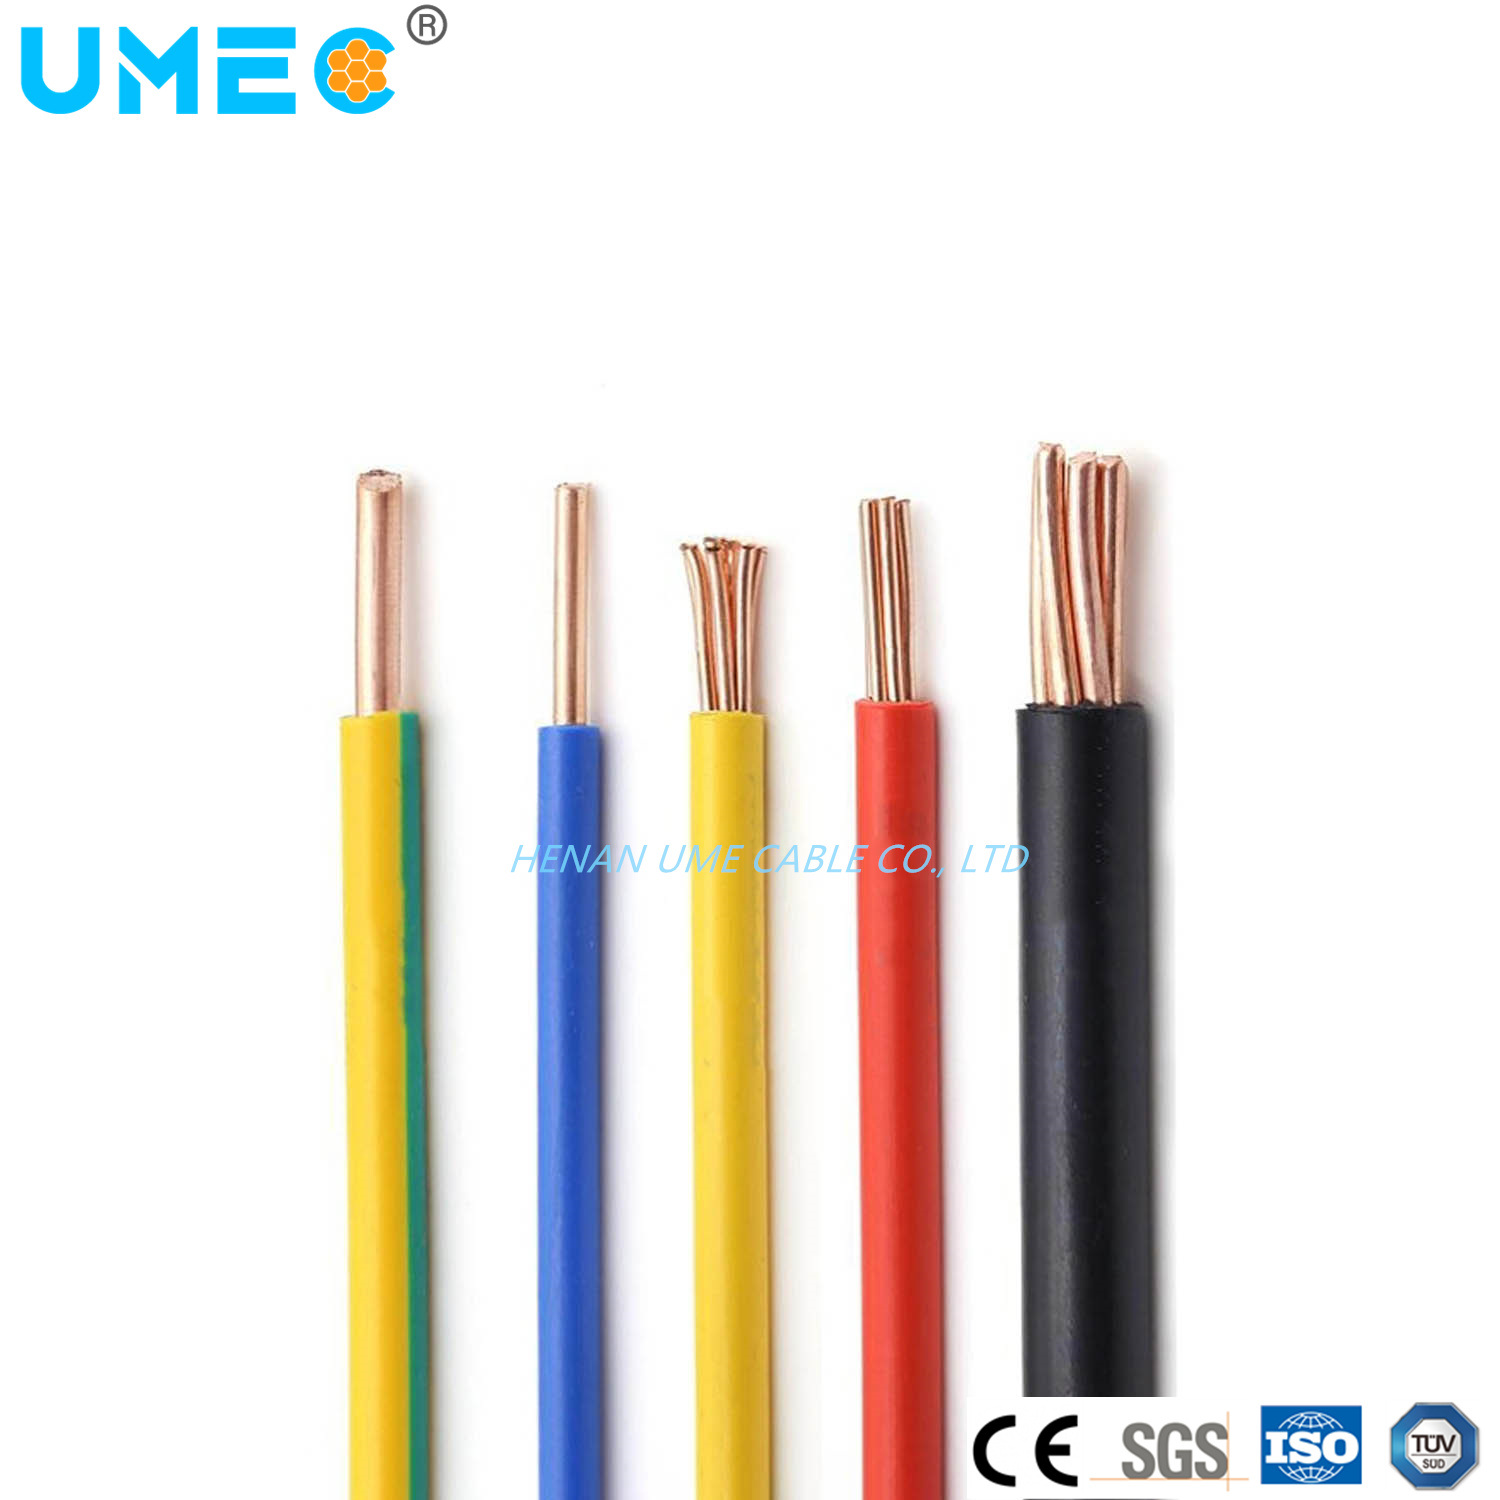 Fire Resistant Falme Retardant 100%Free Oxgen Copper Conductor Class1 Class2 Conductor PVC Insulated Wire Earthing Wire